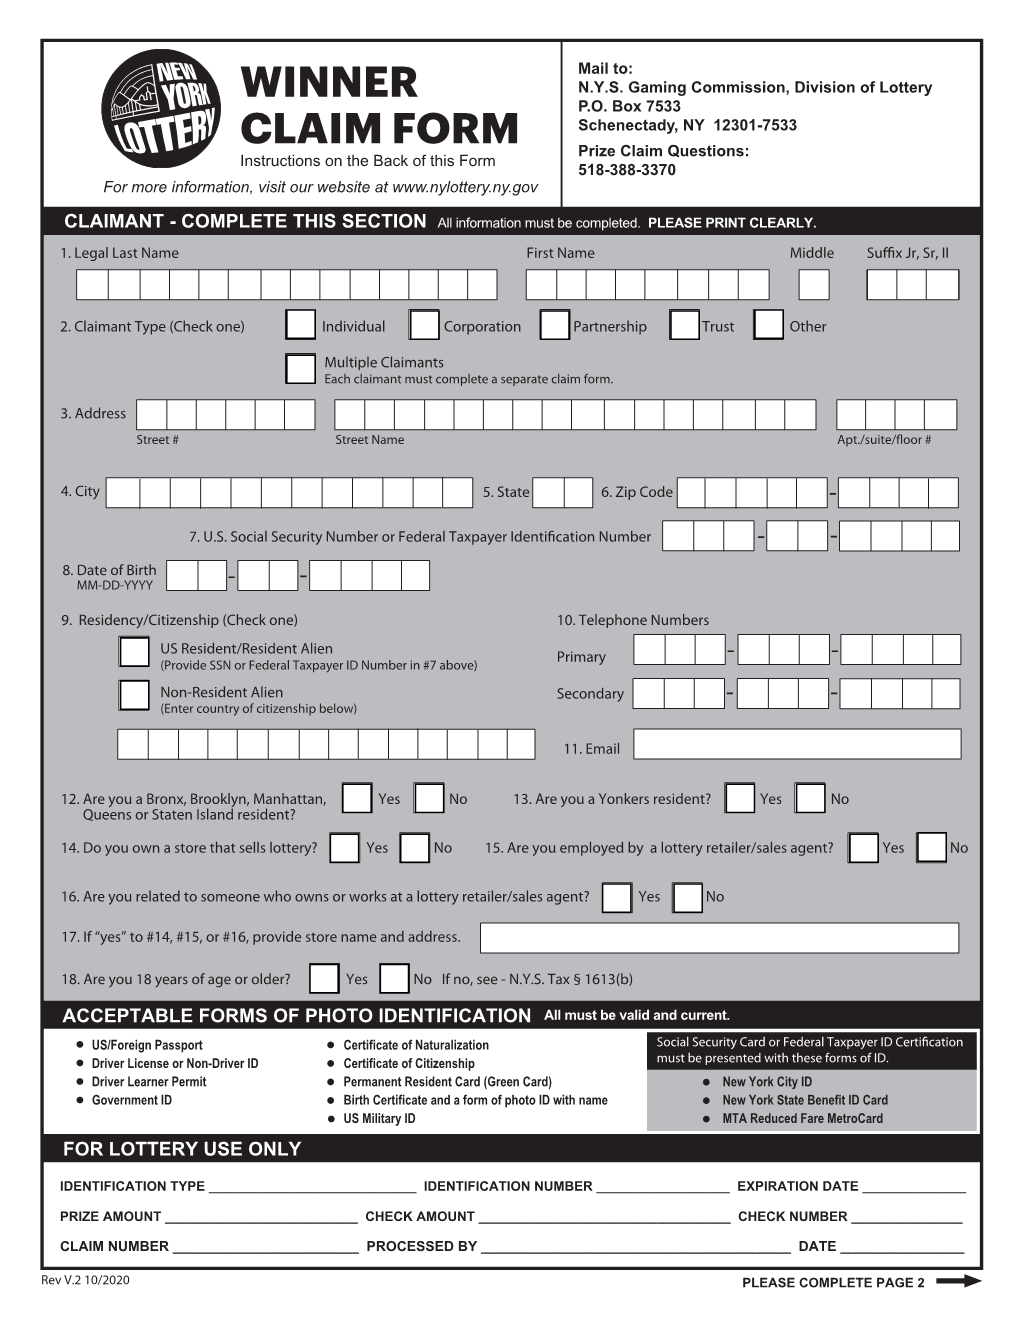 Winner Claim Form Checklist for Mail-In Claims